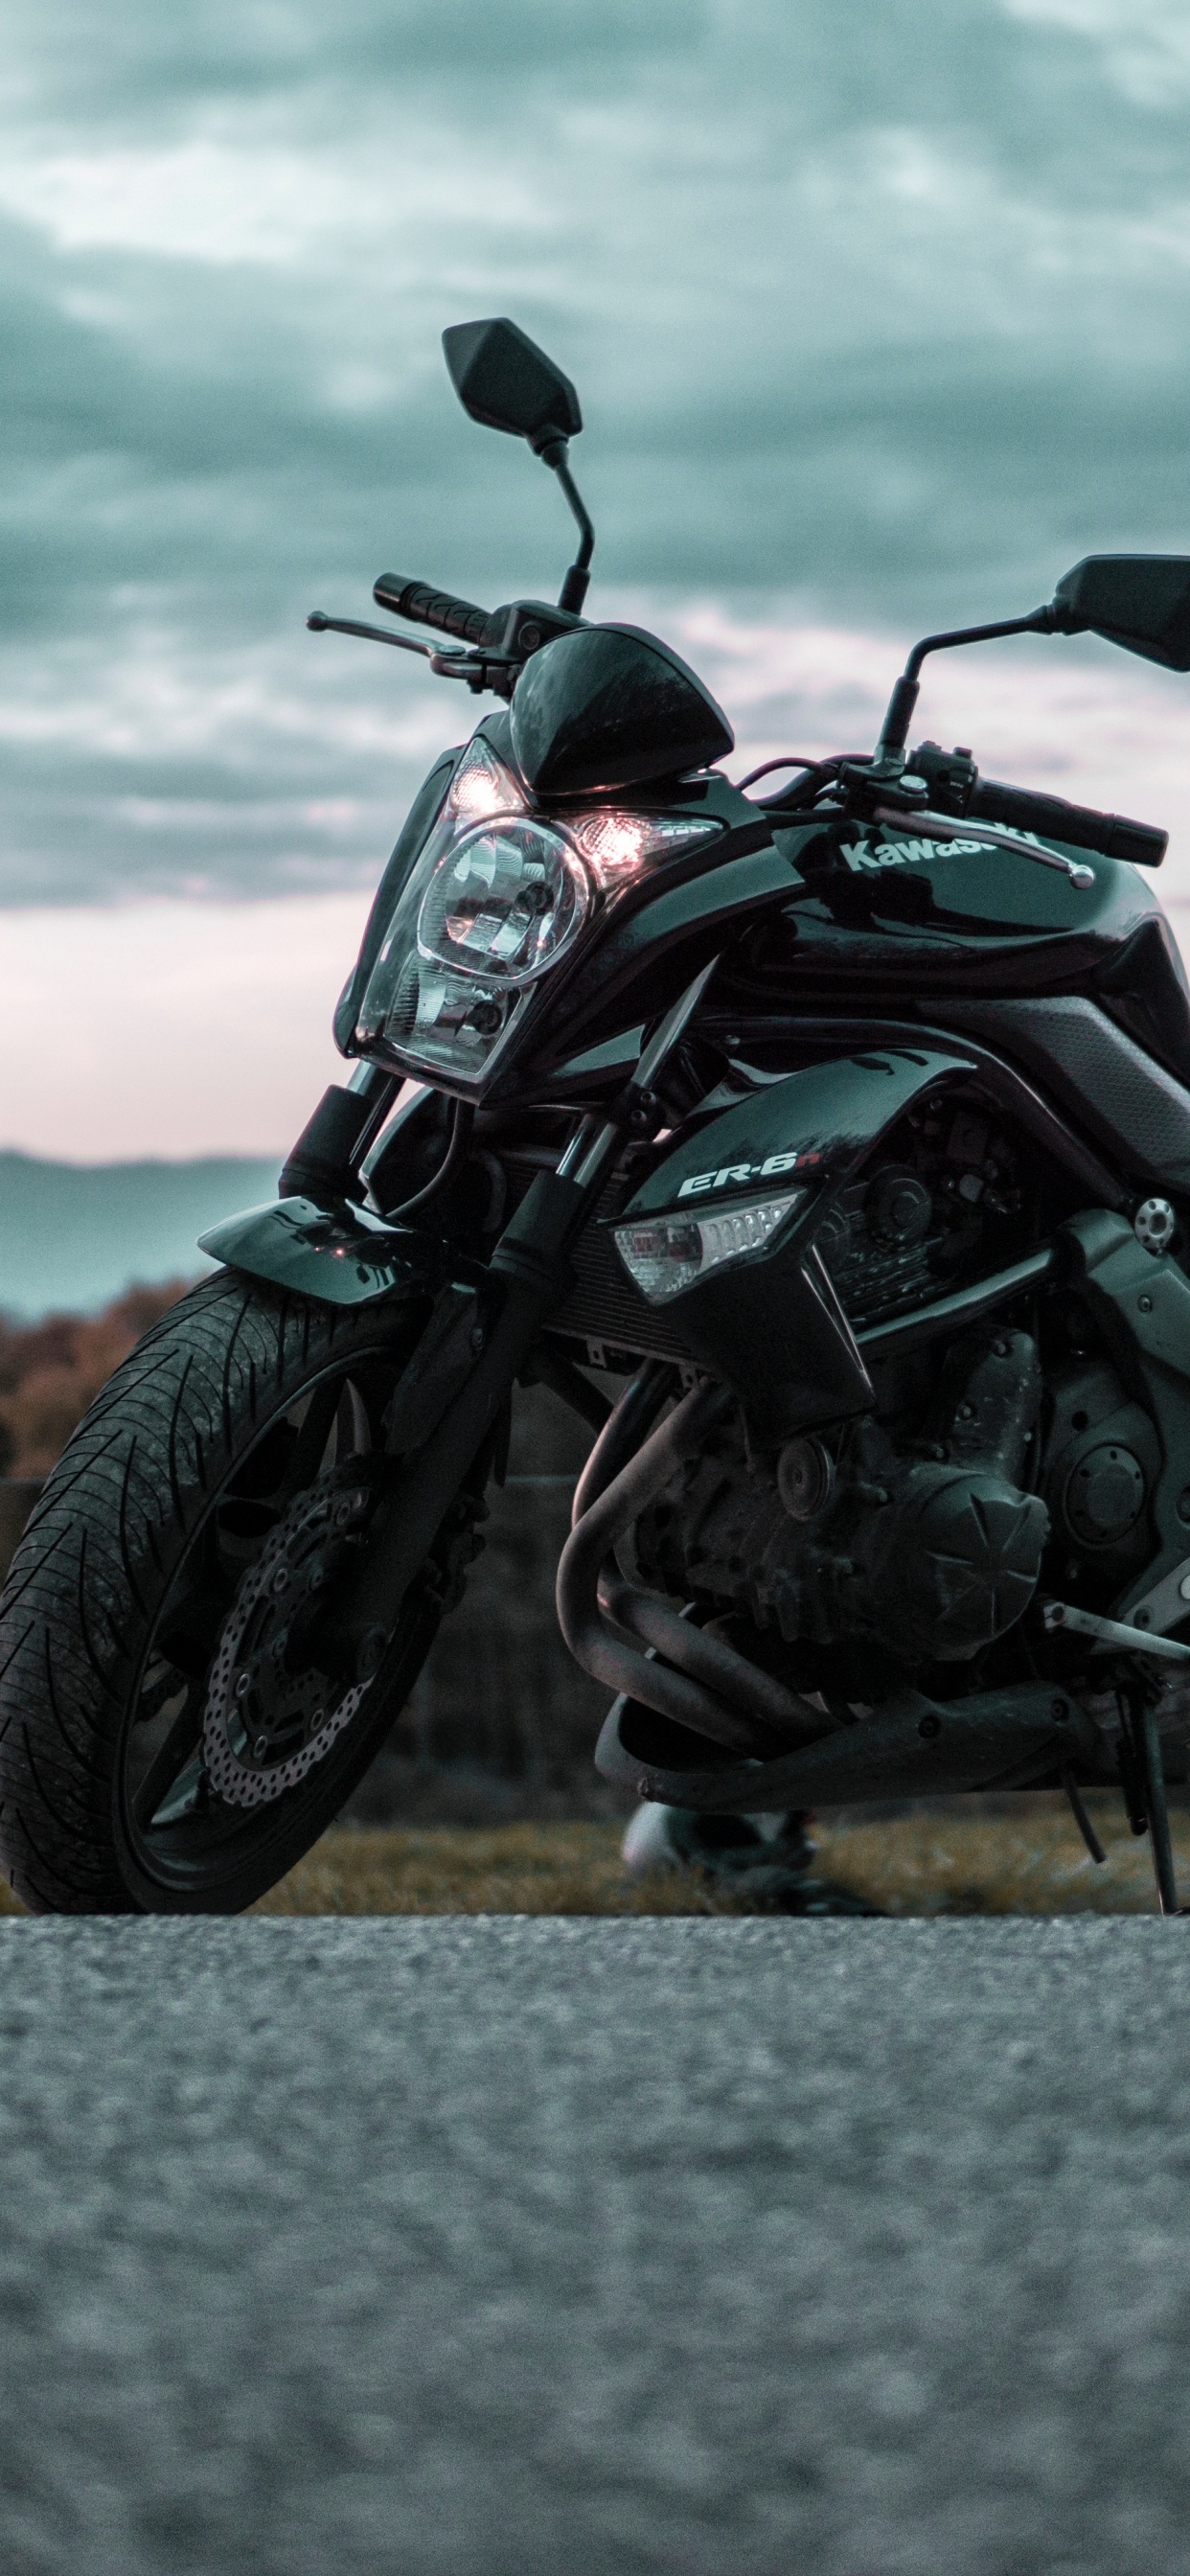 Black and Gray Motorcycle on Gray Asphalt Road During Daytime. Wallpaper in 1242x2688 Resolution